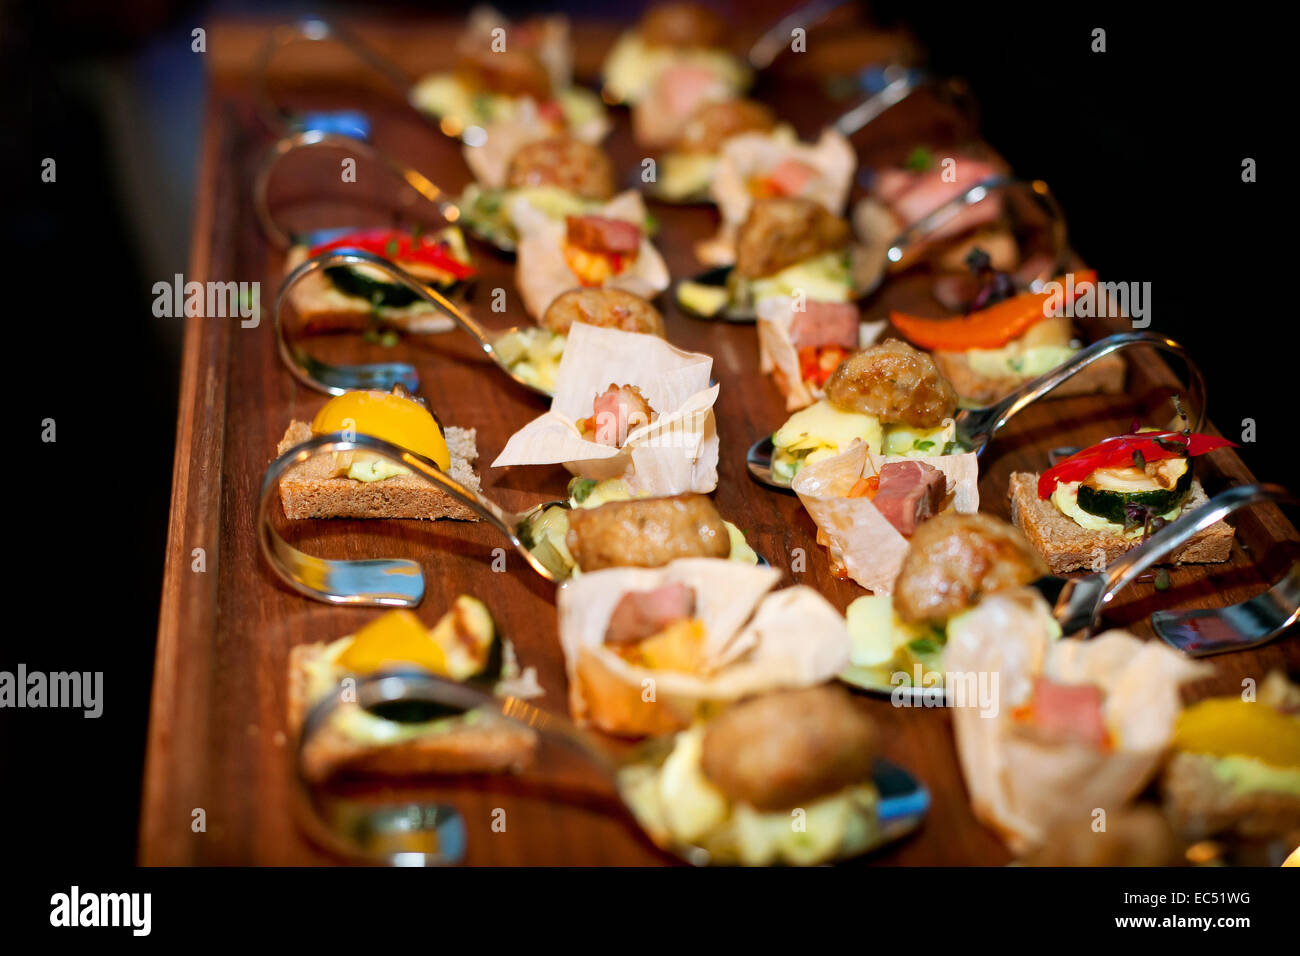 Amuse Gueule, Appetizers Served On A Wooden Plate Stock Photo